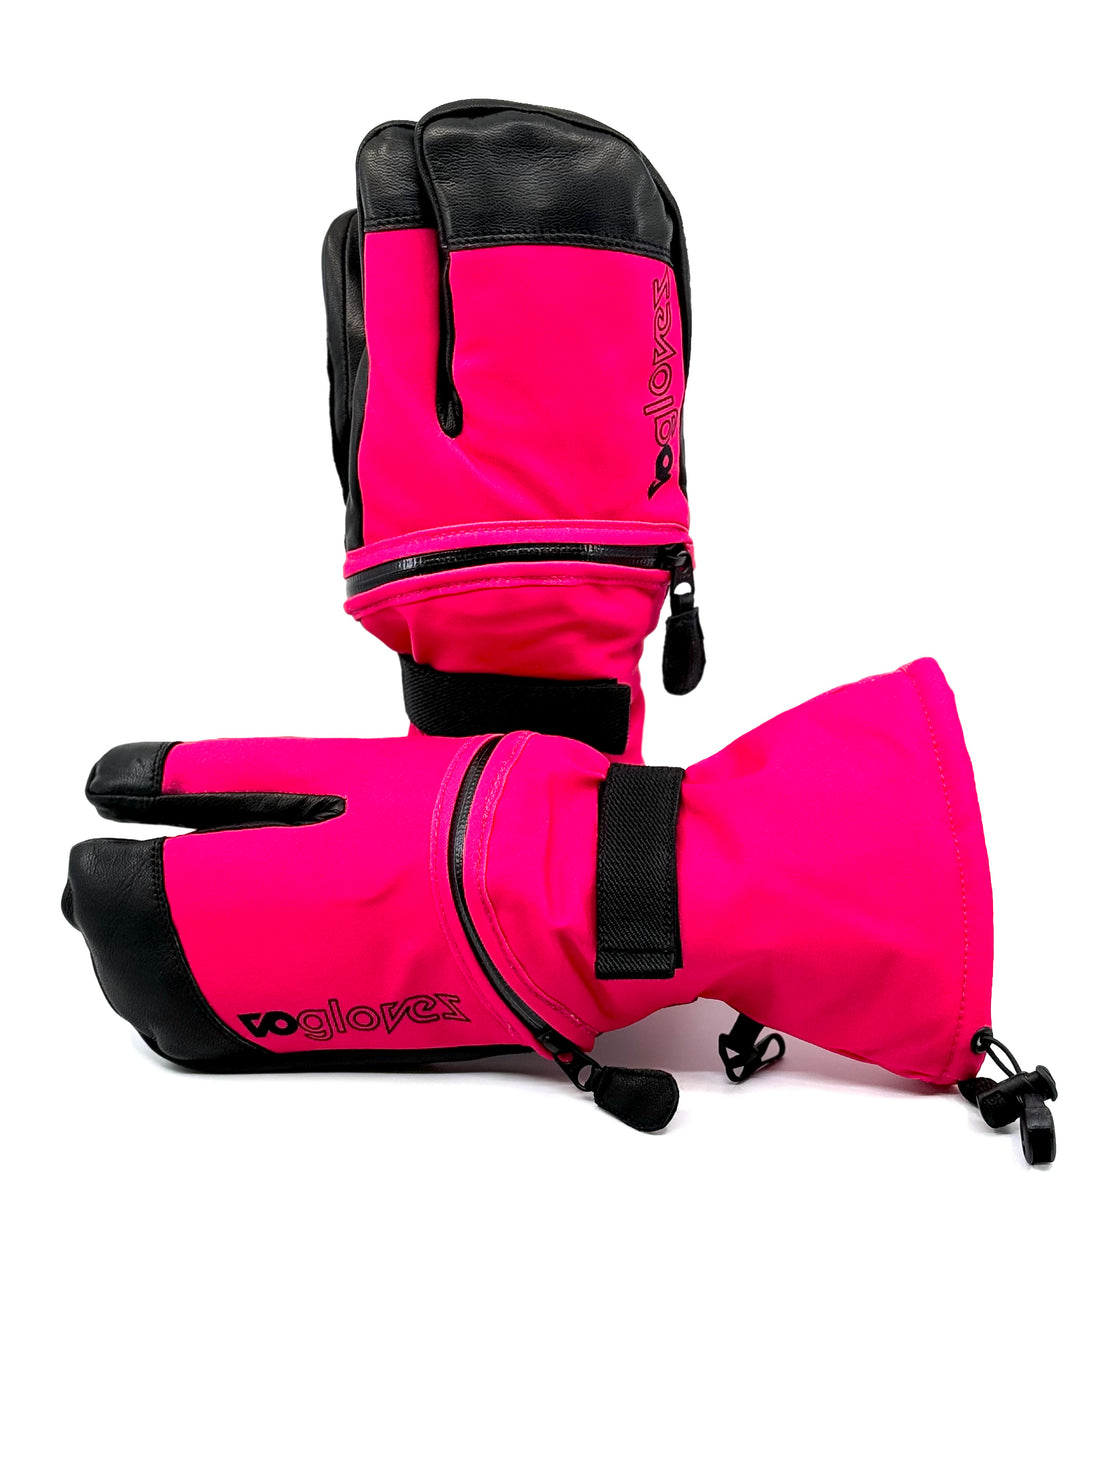 NEW! HOT PINK TRIGGER MITTS